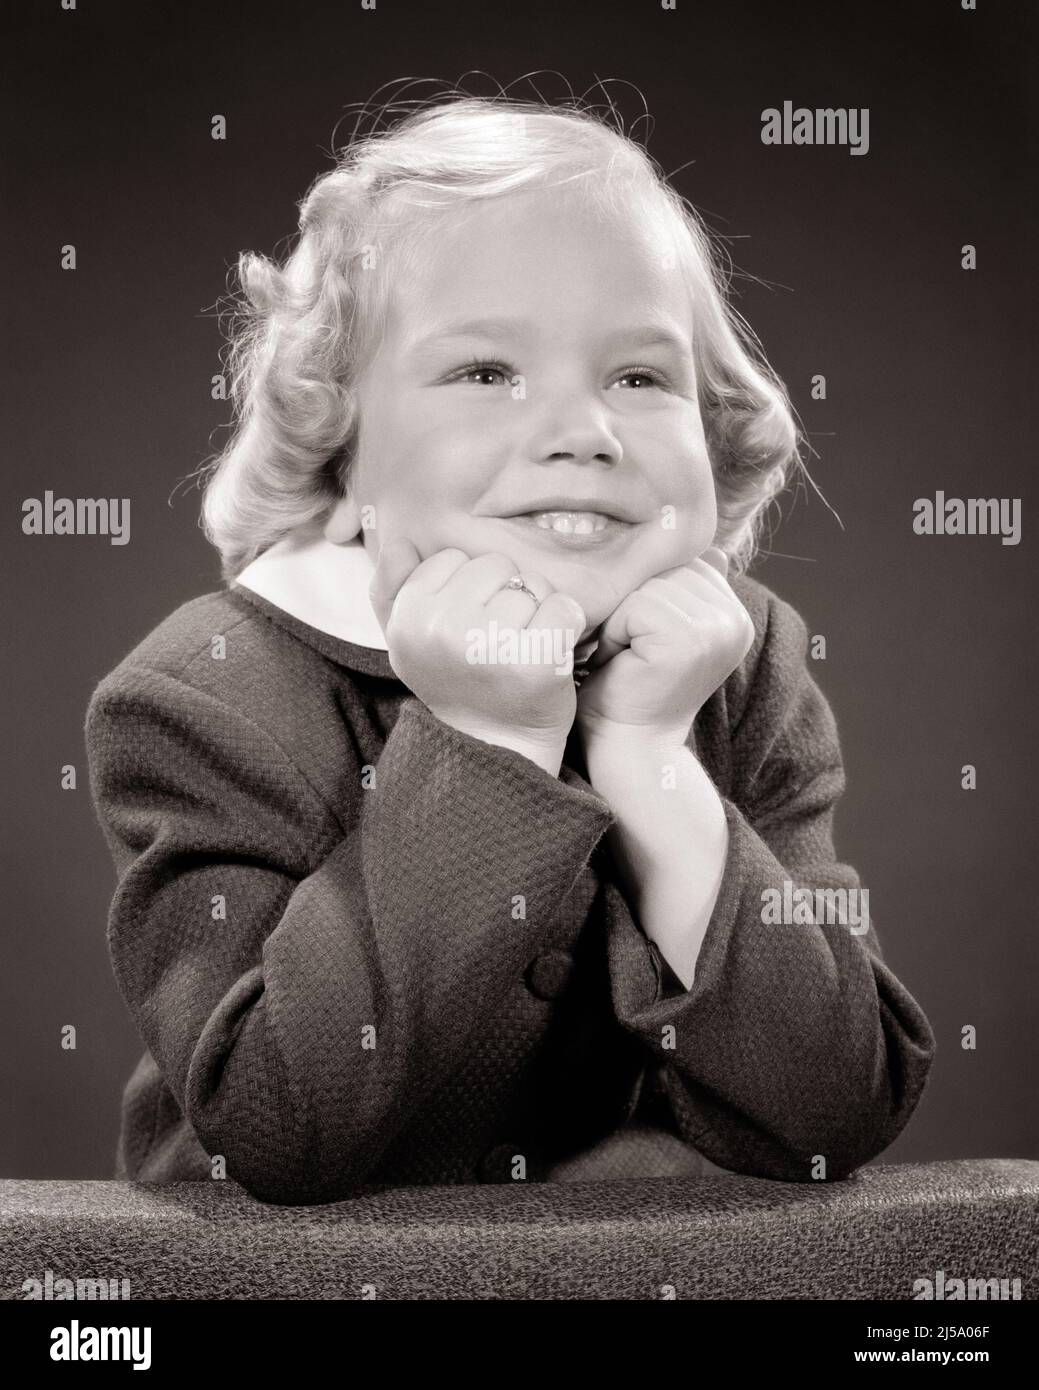 1960s PORTRAIT OF CUTE BLONDE GIRL RESTING HER CHIN ON HER FISTS LOOKING OFF CAMERA WITH AN EXUBERANT VIVACIOUS TOOTHY SMILE  - j7665 HAR001 HARS HALF-LENGTH CHIN CONFIDENCE EXPRESSIONS B&W RESTING GOALS DREAMS HAPPINESS CHEERFUL EXCITEMENT PRIDE FISTS SMILES TOOTHY JOYFUL STYLISH PLEASANT AGREEABLE CHARMING GROWTH JUVENILES LOVABLE PLEASING ADORABLE APPEALING BLACK AND WHITE CAUCASIAN ETHNICITY EXUBERANT HAR001 OLD FASHIONED VIVACIOUS Stock Photo